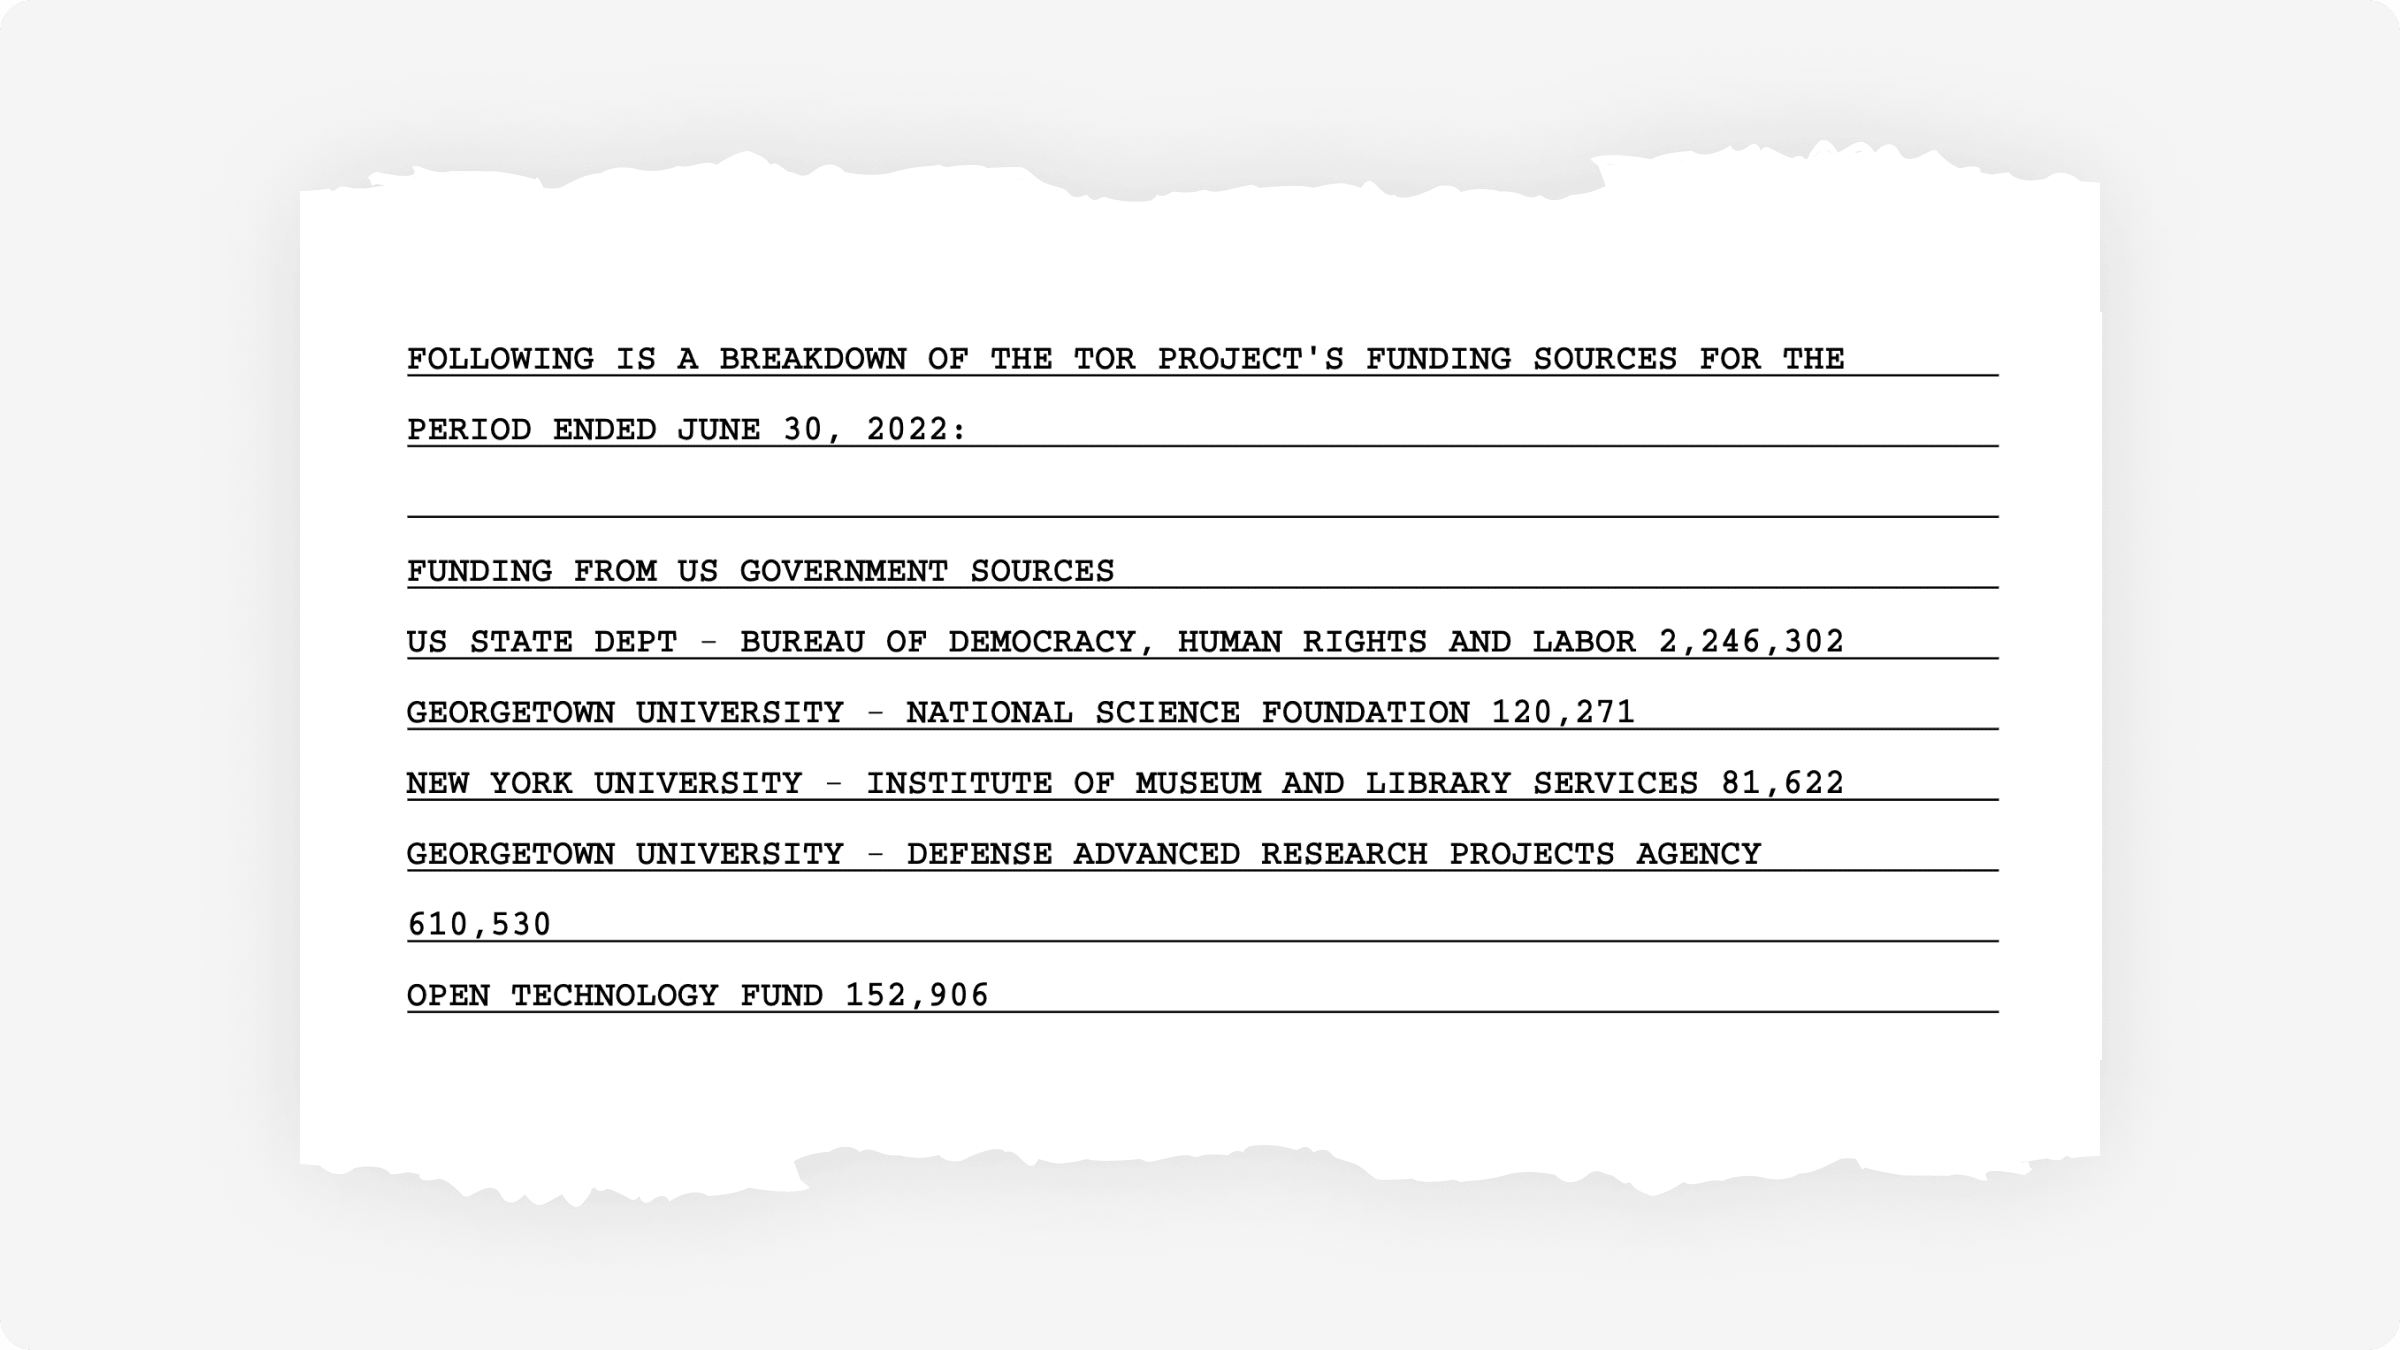 Screenshot of page 43 from Form-990 showing the breakdown of US government sources